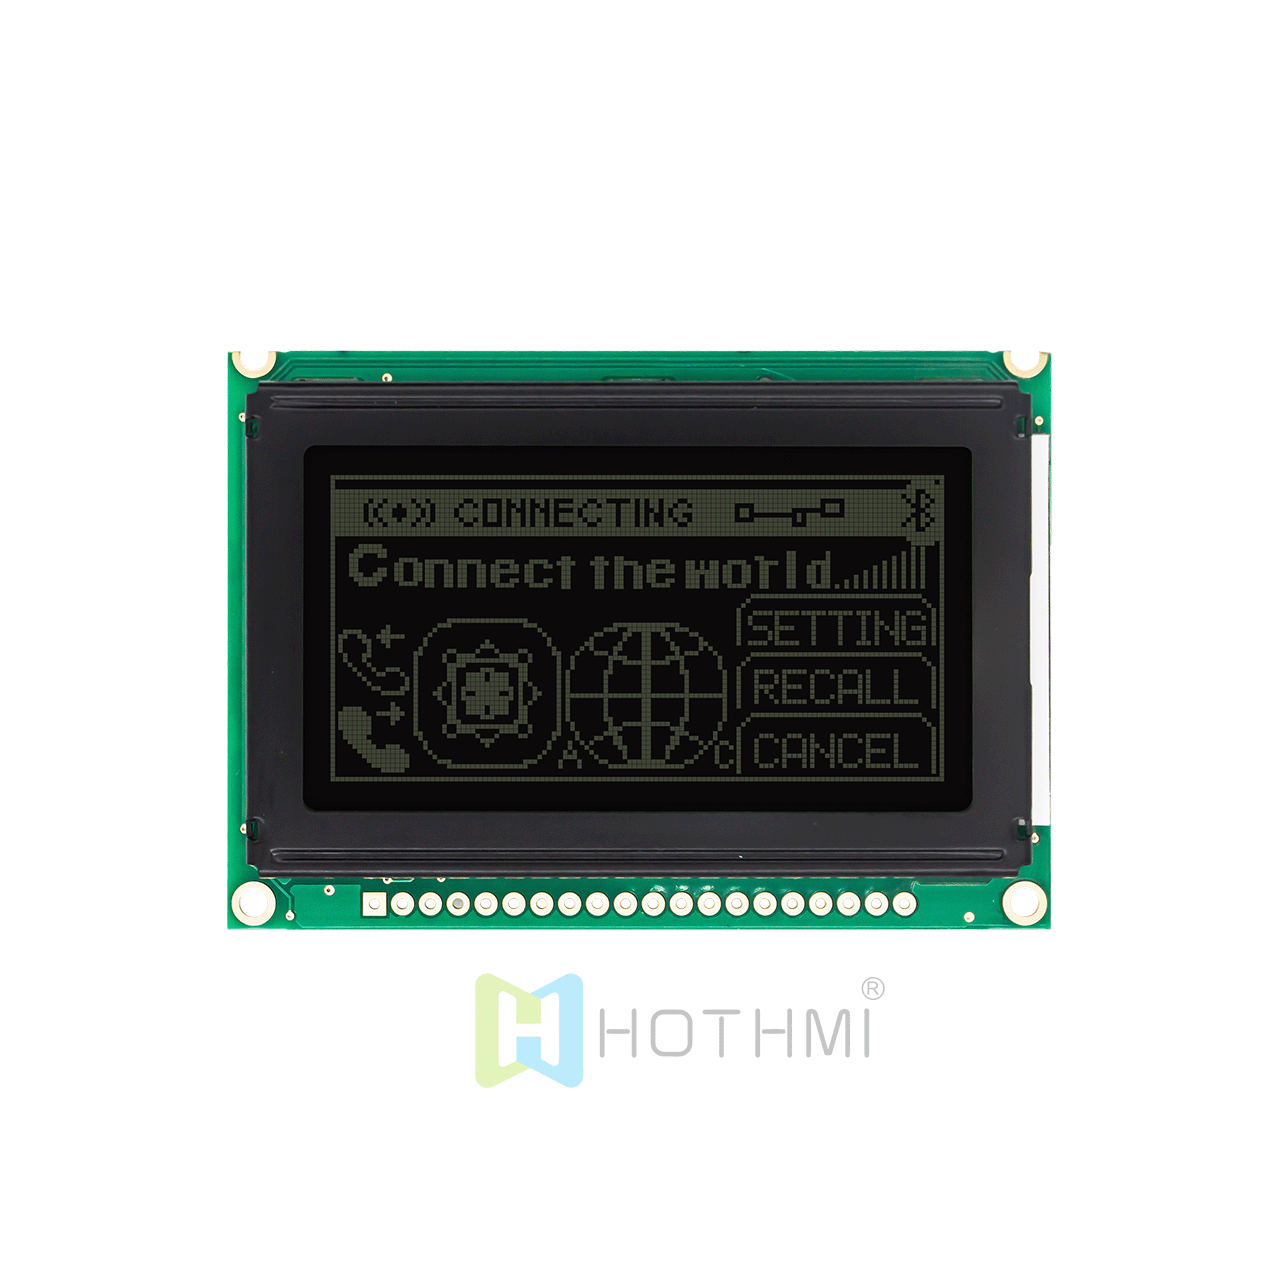 2.7 inch 128x64 Graphic LCD Liquid Crystal Dot Matrix Module | DFSTN Negative Display | For Arduino | Black Background and White Characters